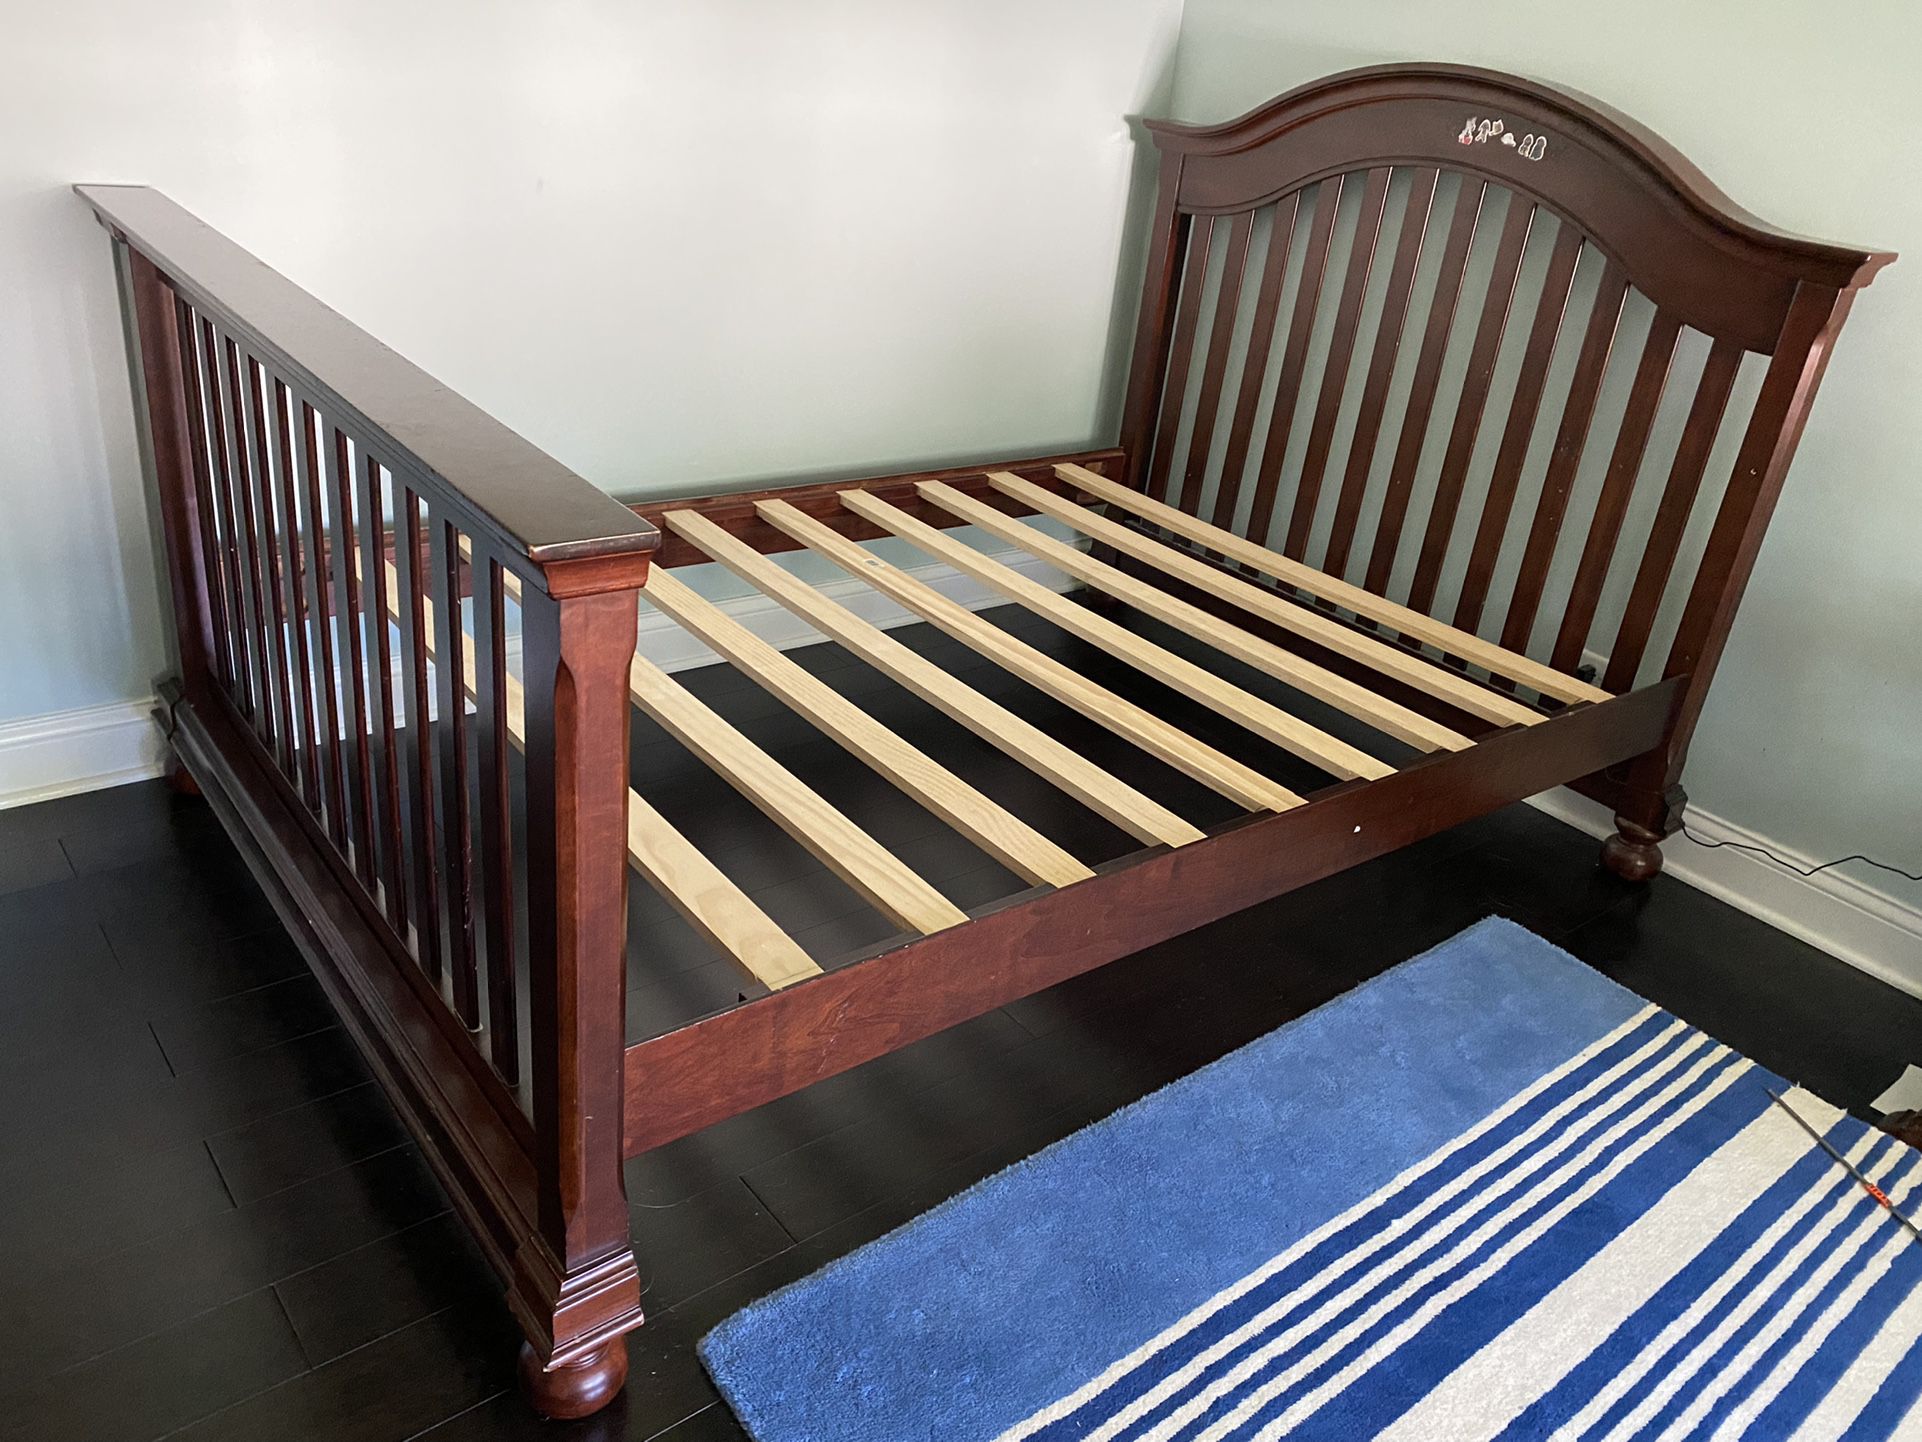 Crib+toddler+full Bed Complete Conversion Set